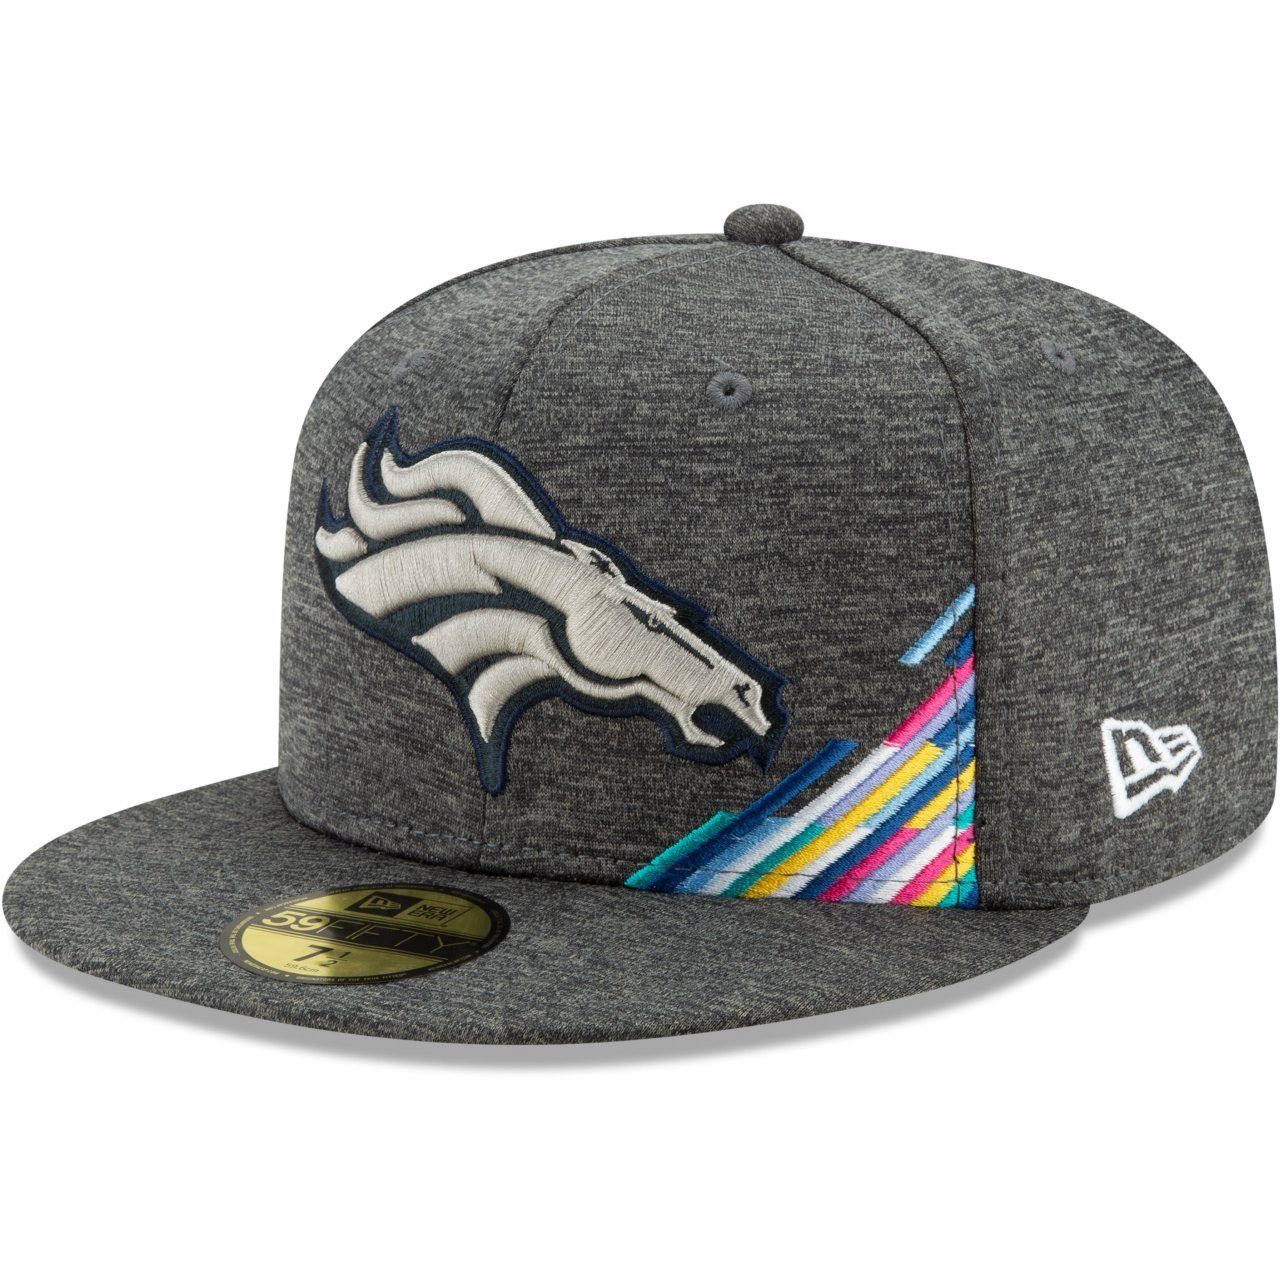 New Era Fitted Cap 59Fifty CRUCIAL CATCH NFL Teams Denver Broncos